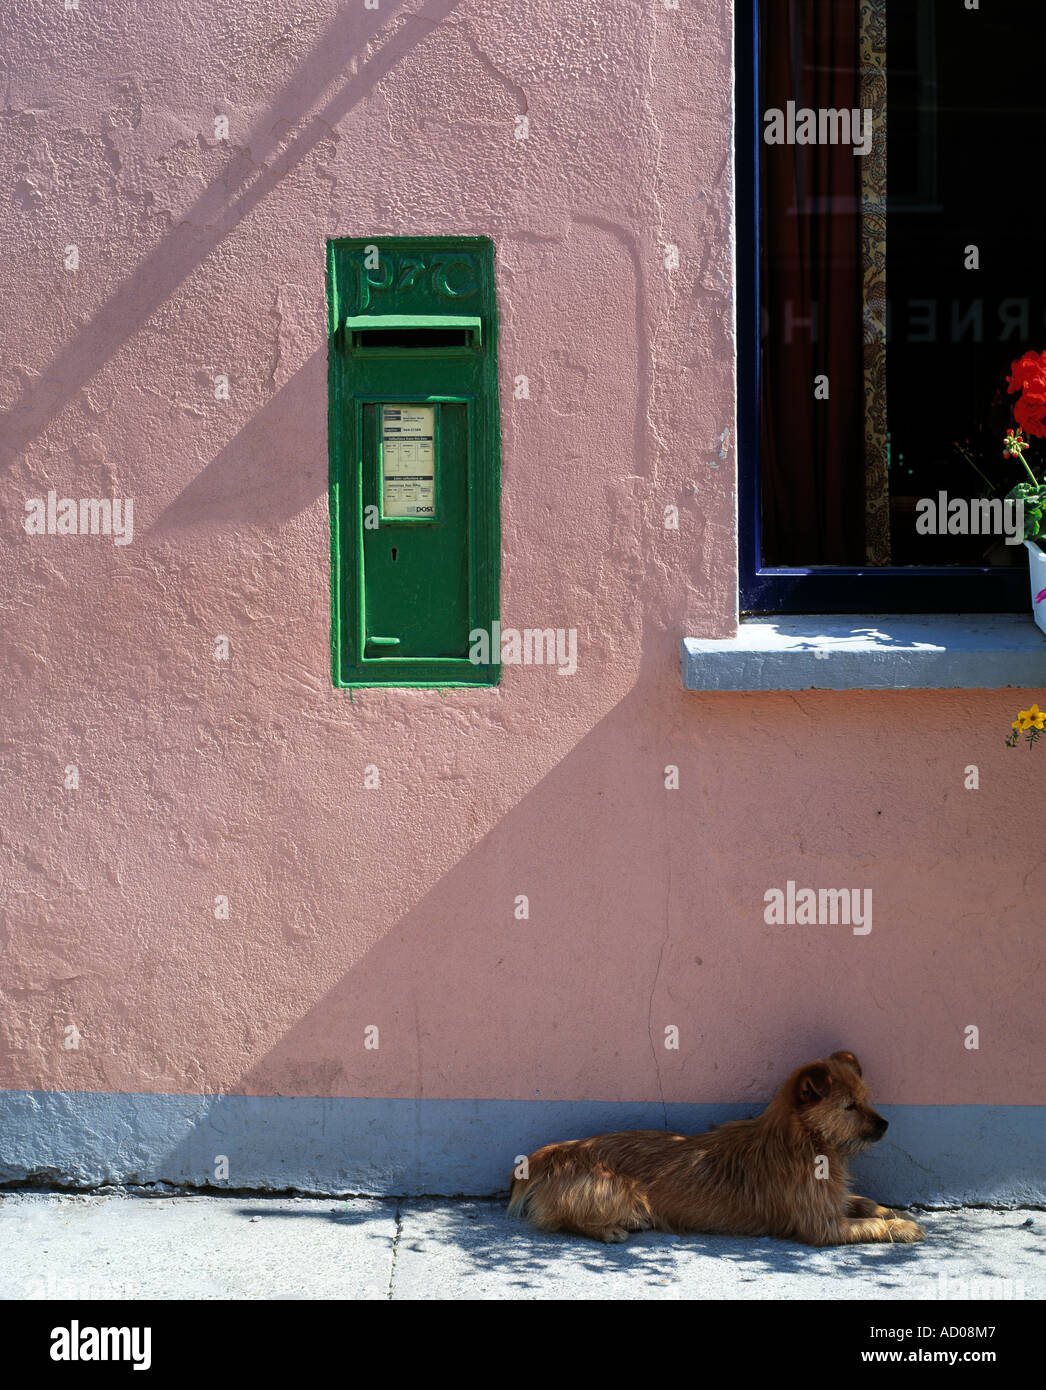 caherciveen ring of kerrypost box on a pub wall and a little dog lying on pavement of an irish town, irish rural post box boxes, Stock Photo